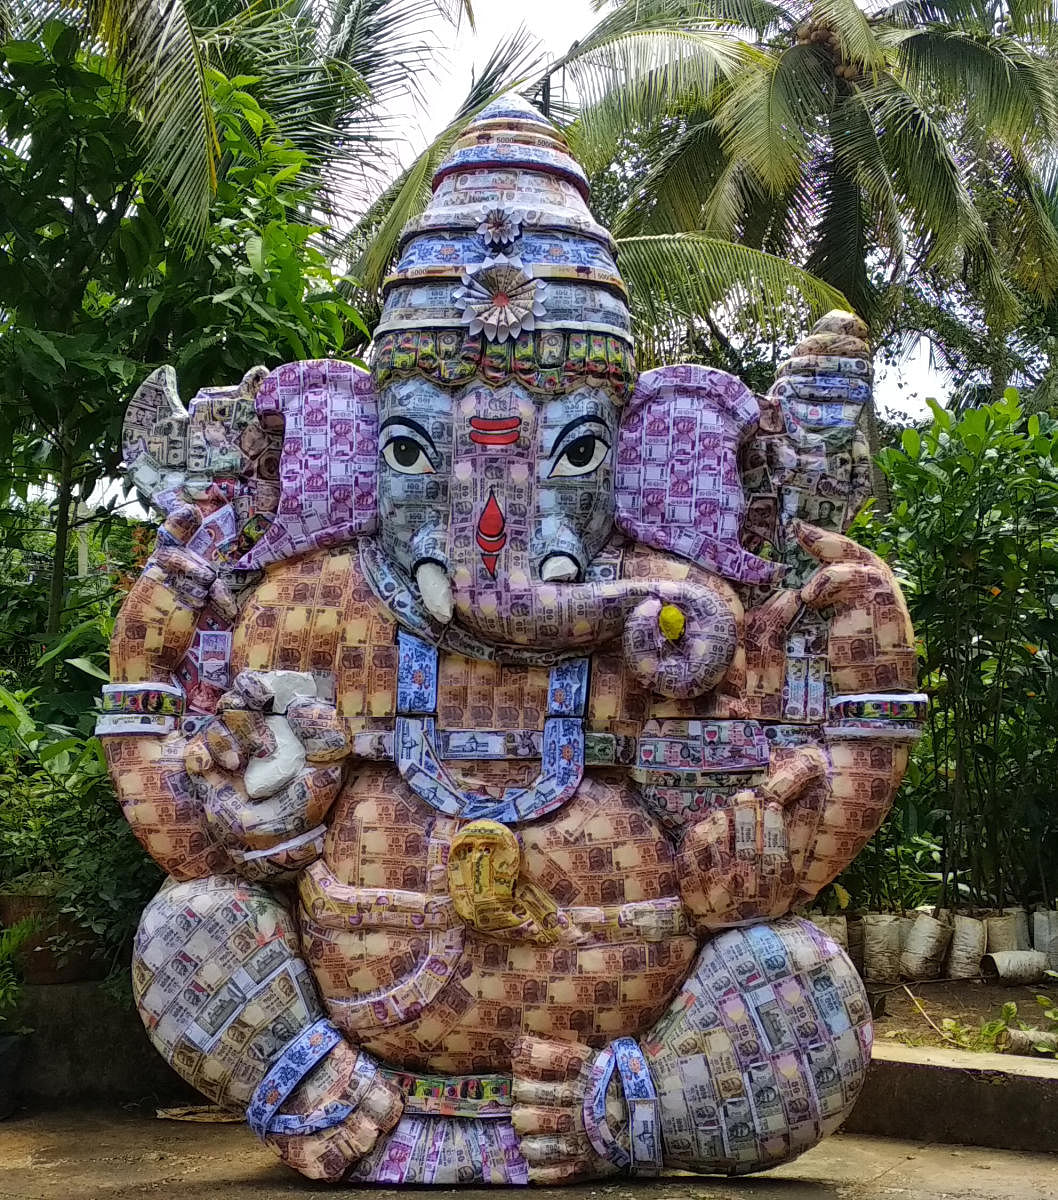 Ganesha idol made from artificial currencies